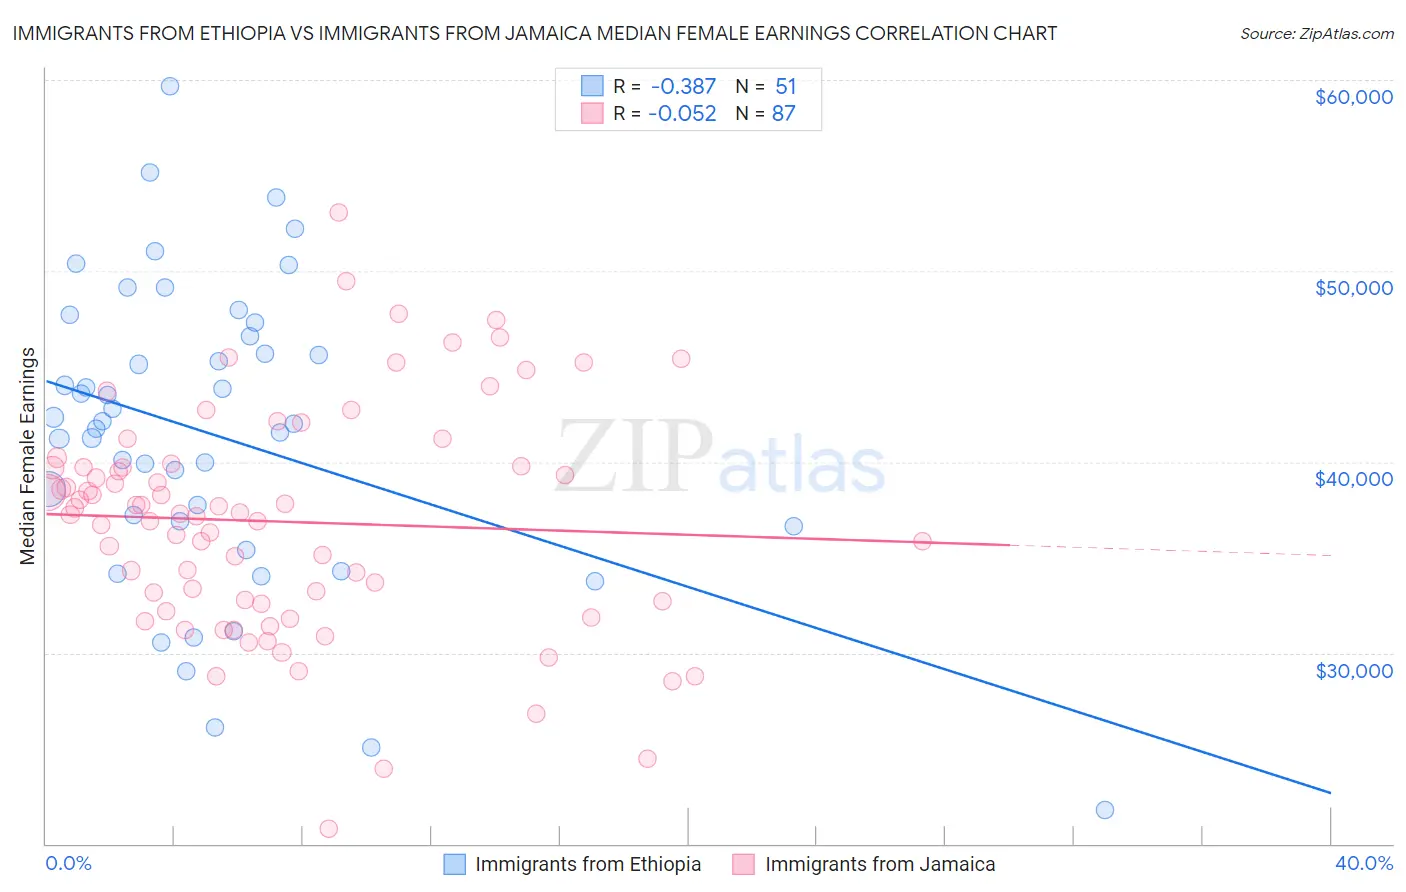 Immigrants from Ethiopia vs Immigrants from Jamaica Median Female Earnings